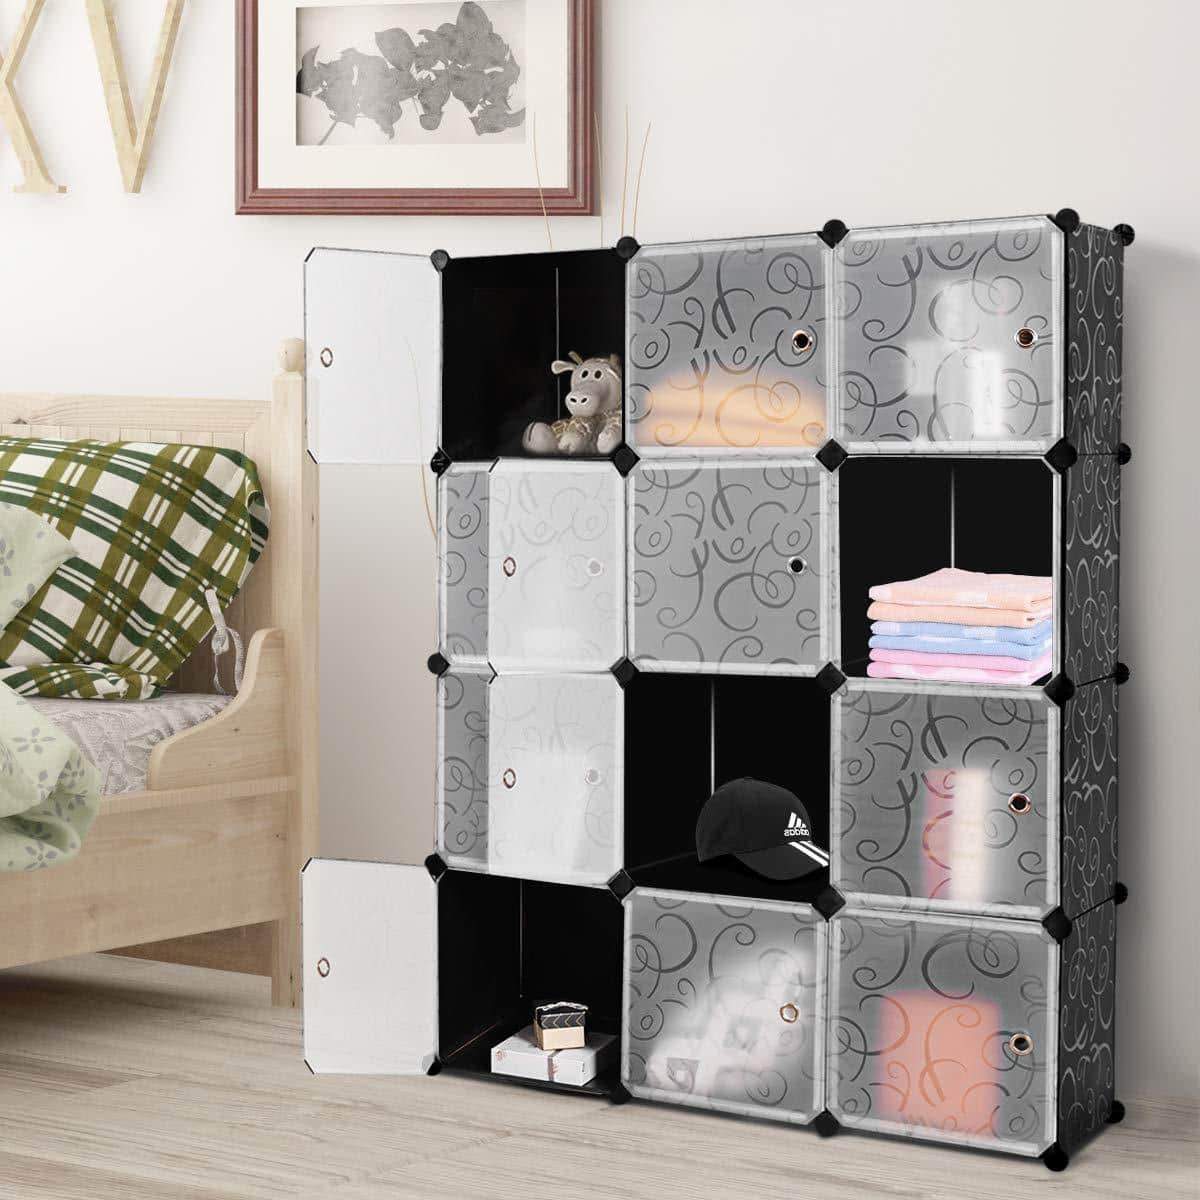 Products tangkula diy storage cubes portable clothes closet wardrobe cabinet bedroom armoire diy storage organizer closet 12 cubes